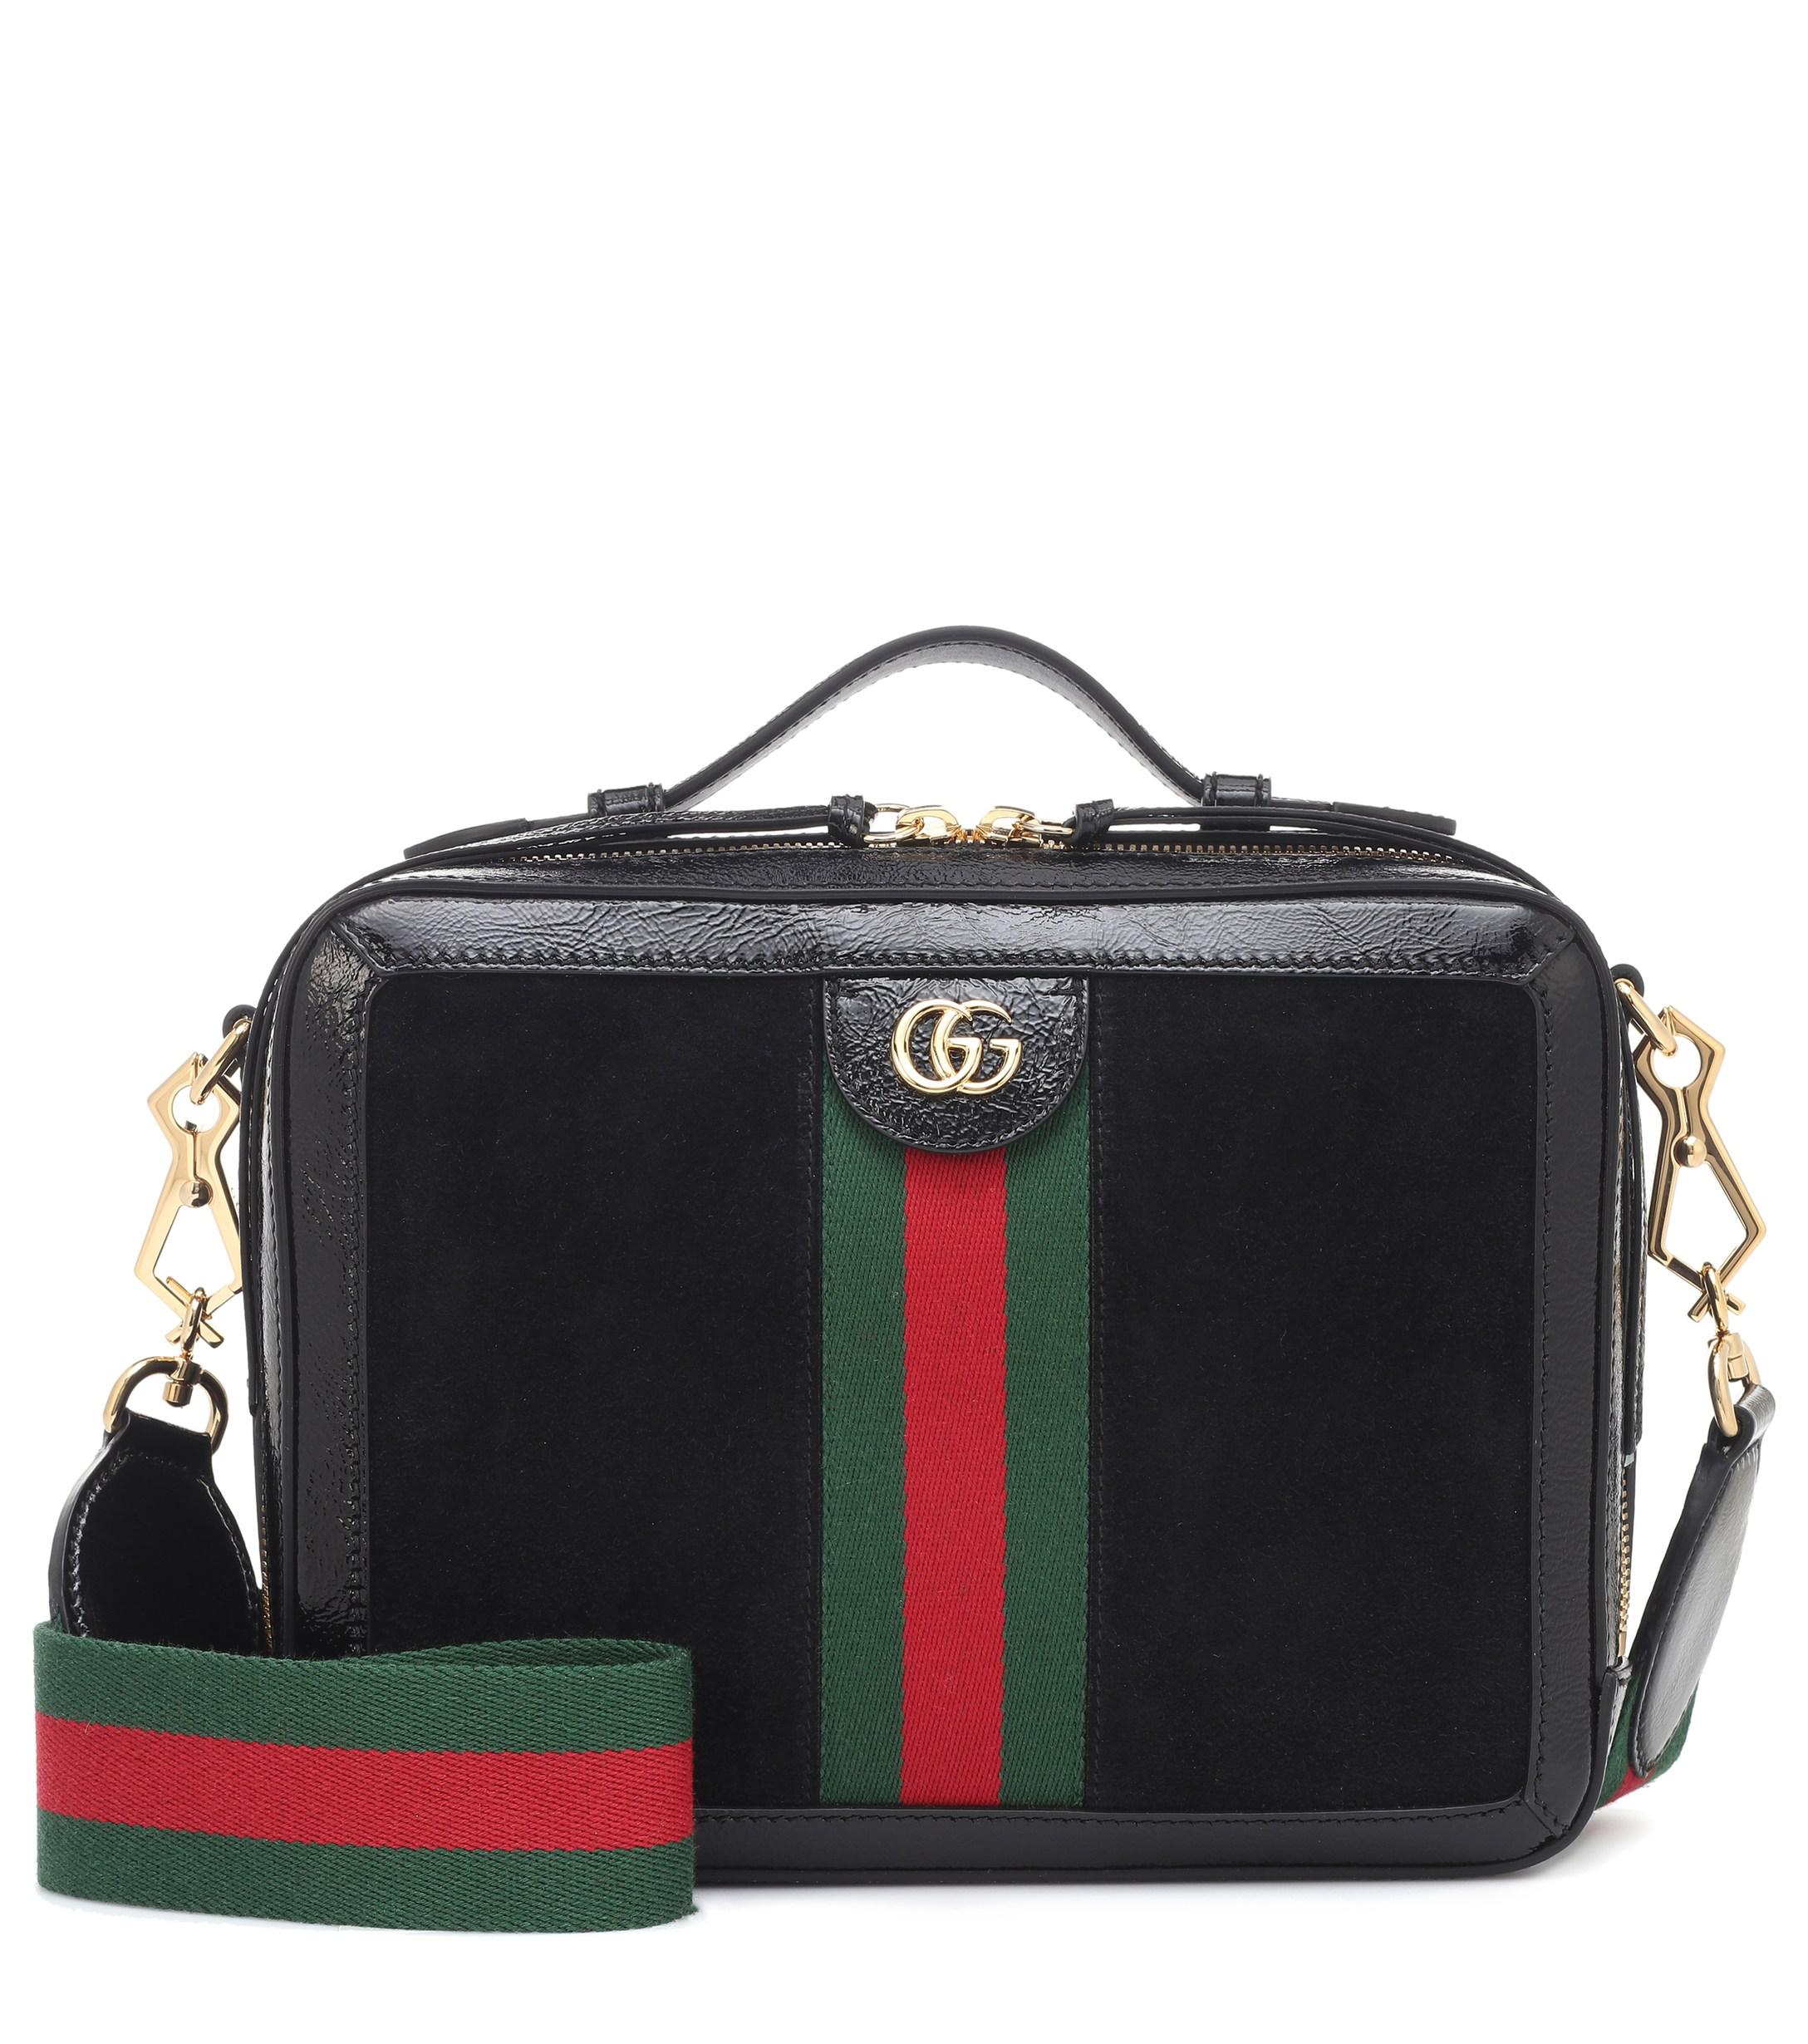 Gucci Ophidia Suede And Leather Shoulder Bag in Black - Lyst